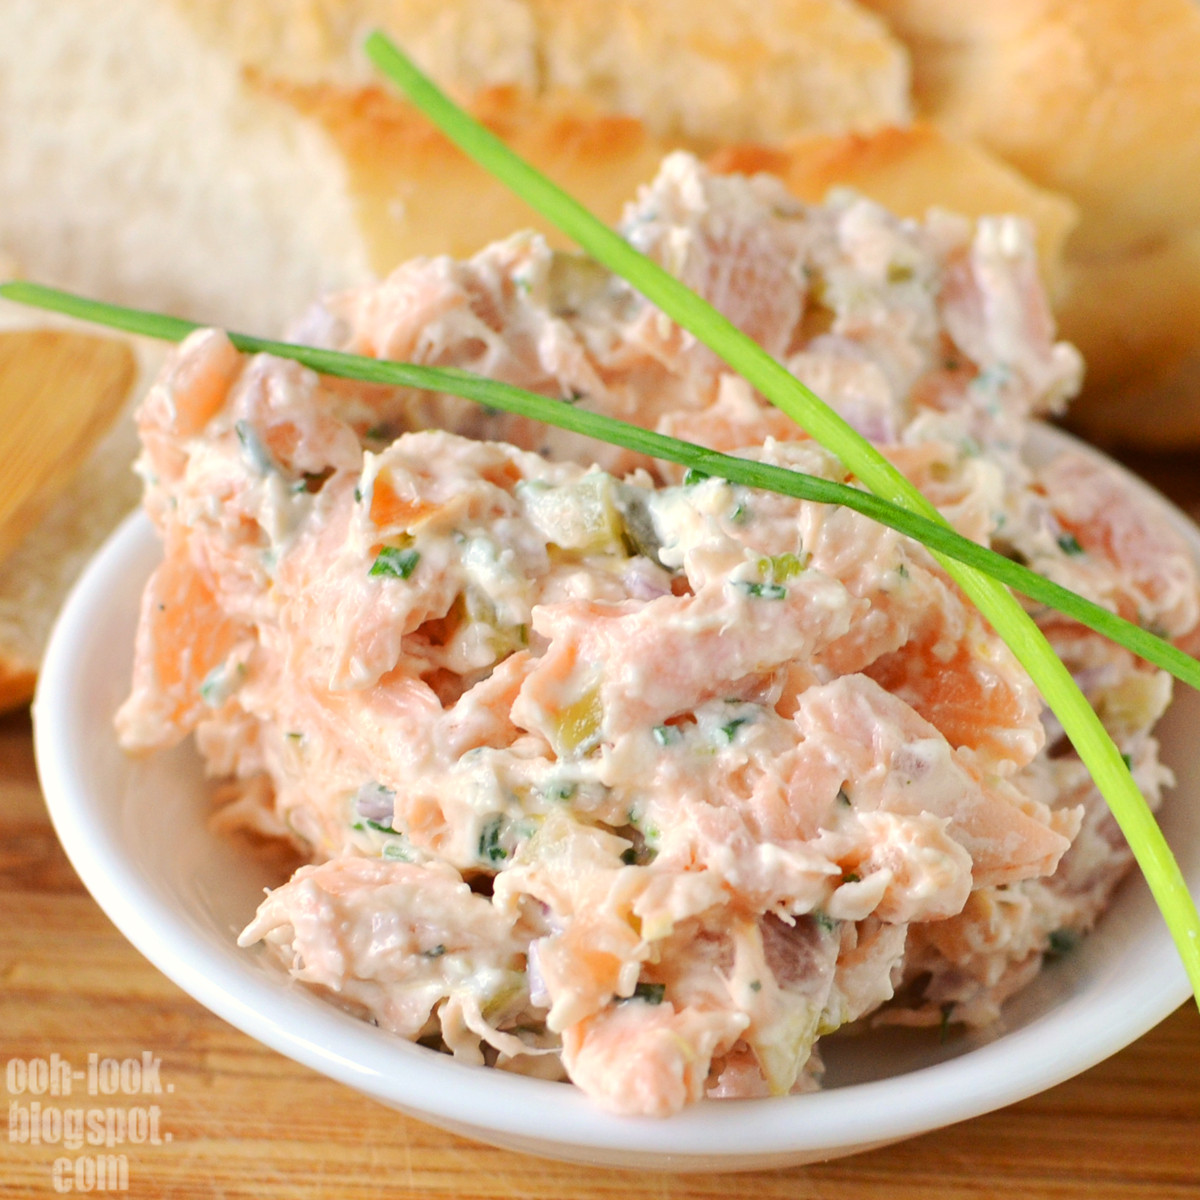 Smoked Salmon Rillettes
 Ooh Look Le fancie Smoked Salmon Rillettes